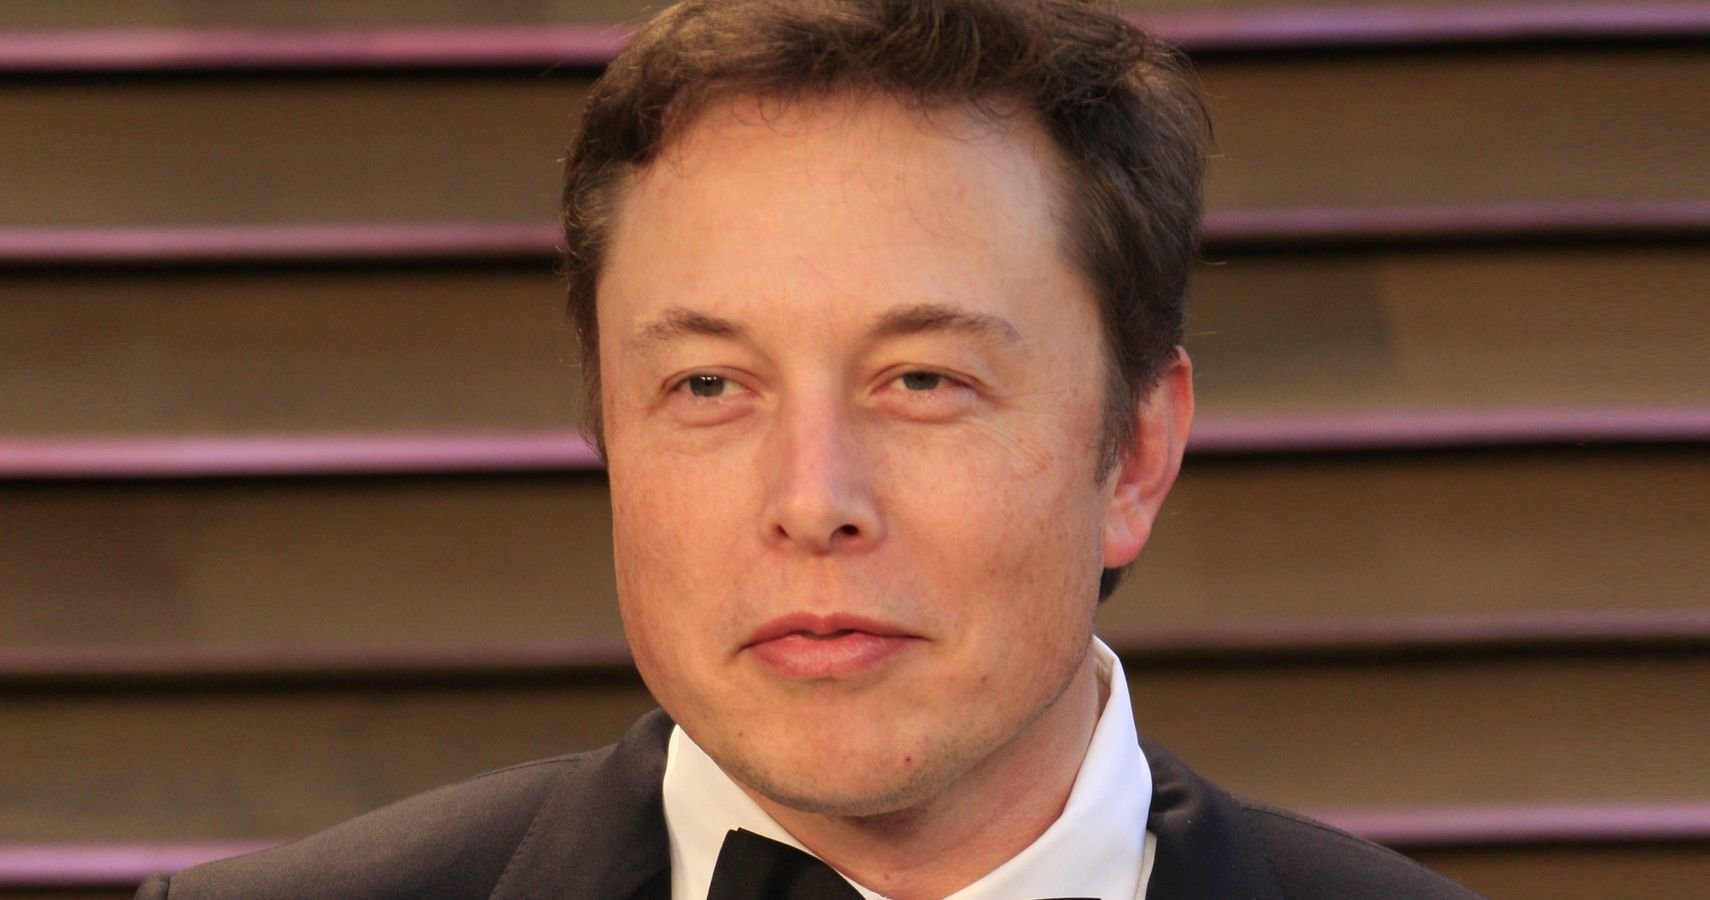 Elon Musk's Six Most Expensive Things